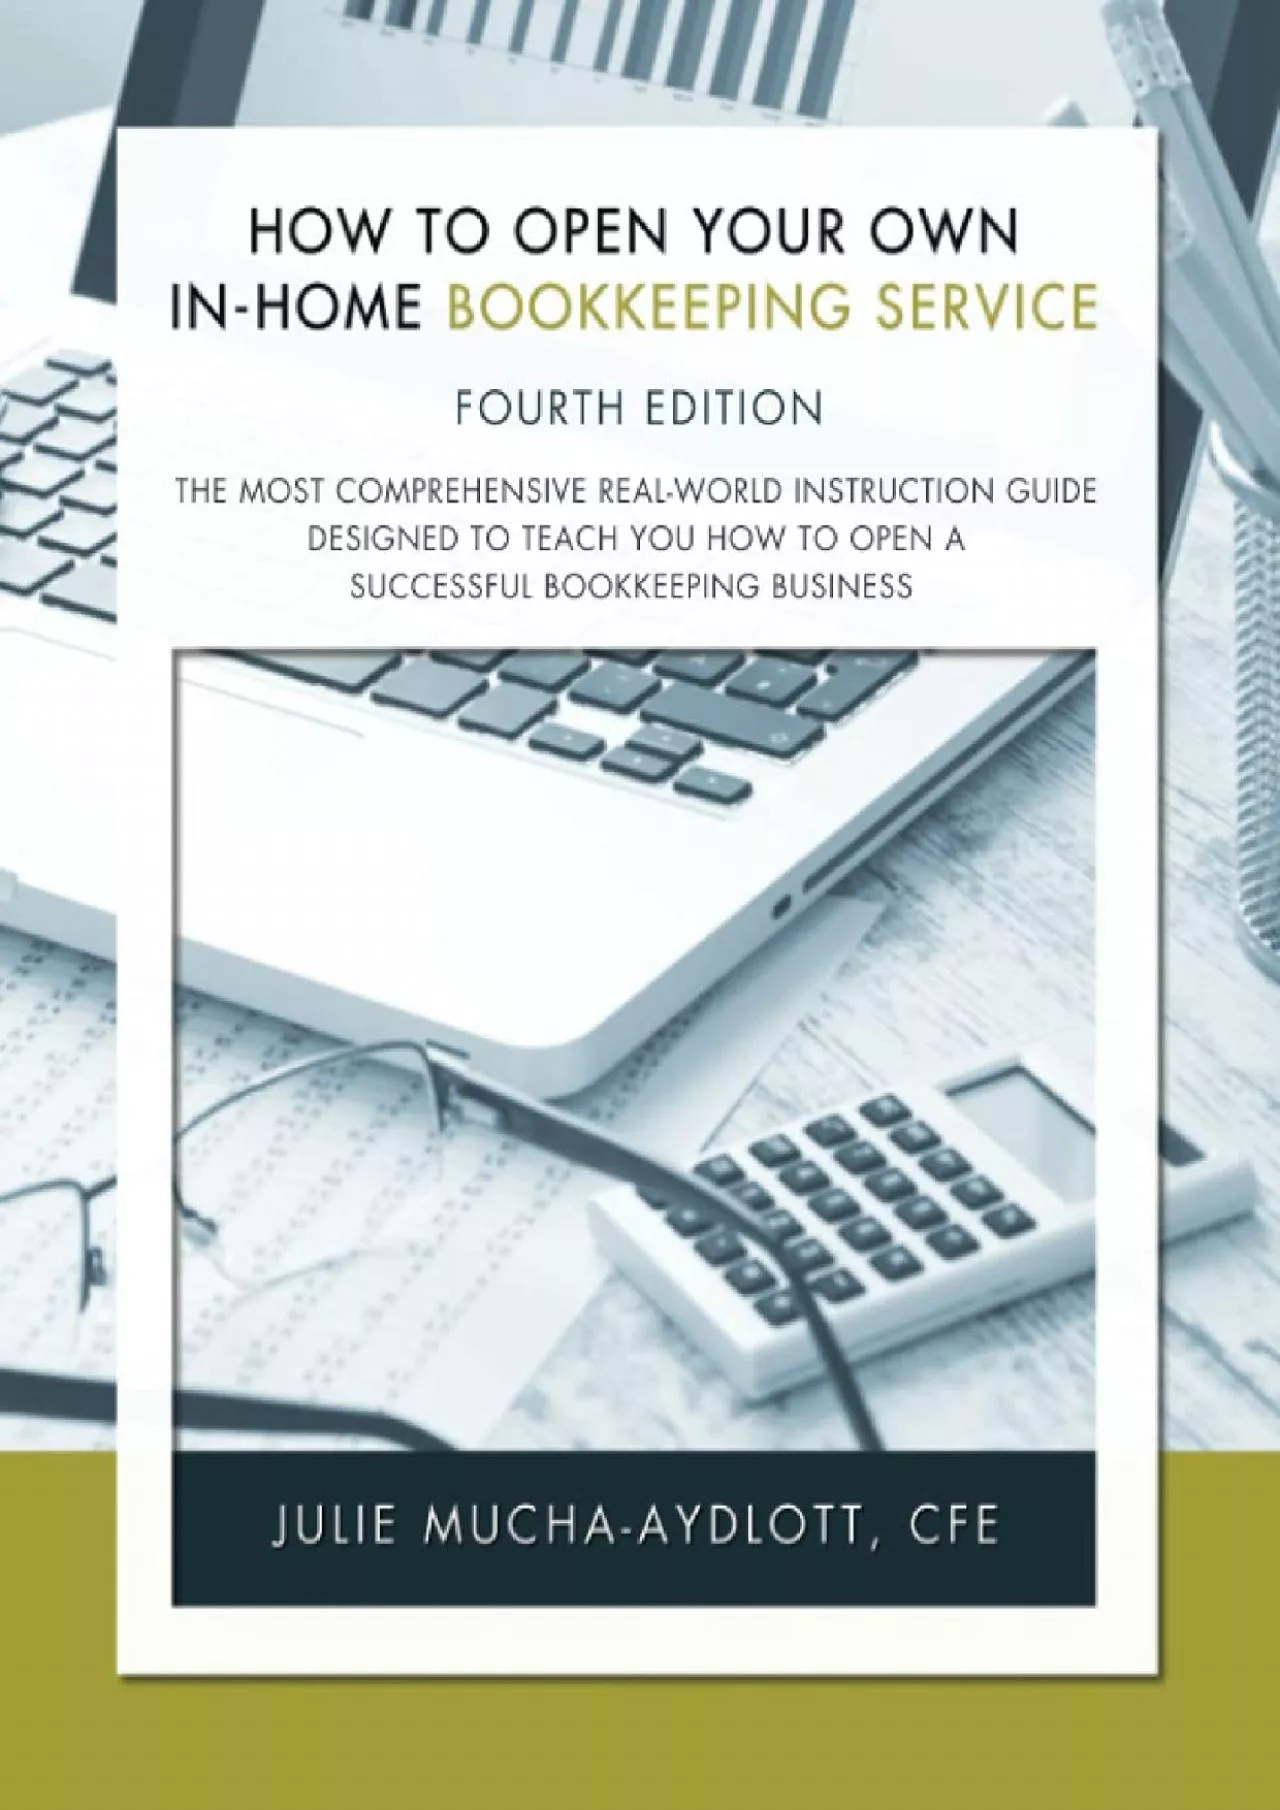 (DOWNLOAD)-How to Open Your Own in-Home Bookkeeping Service 4th Edition